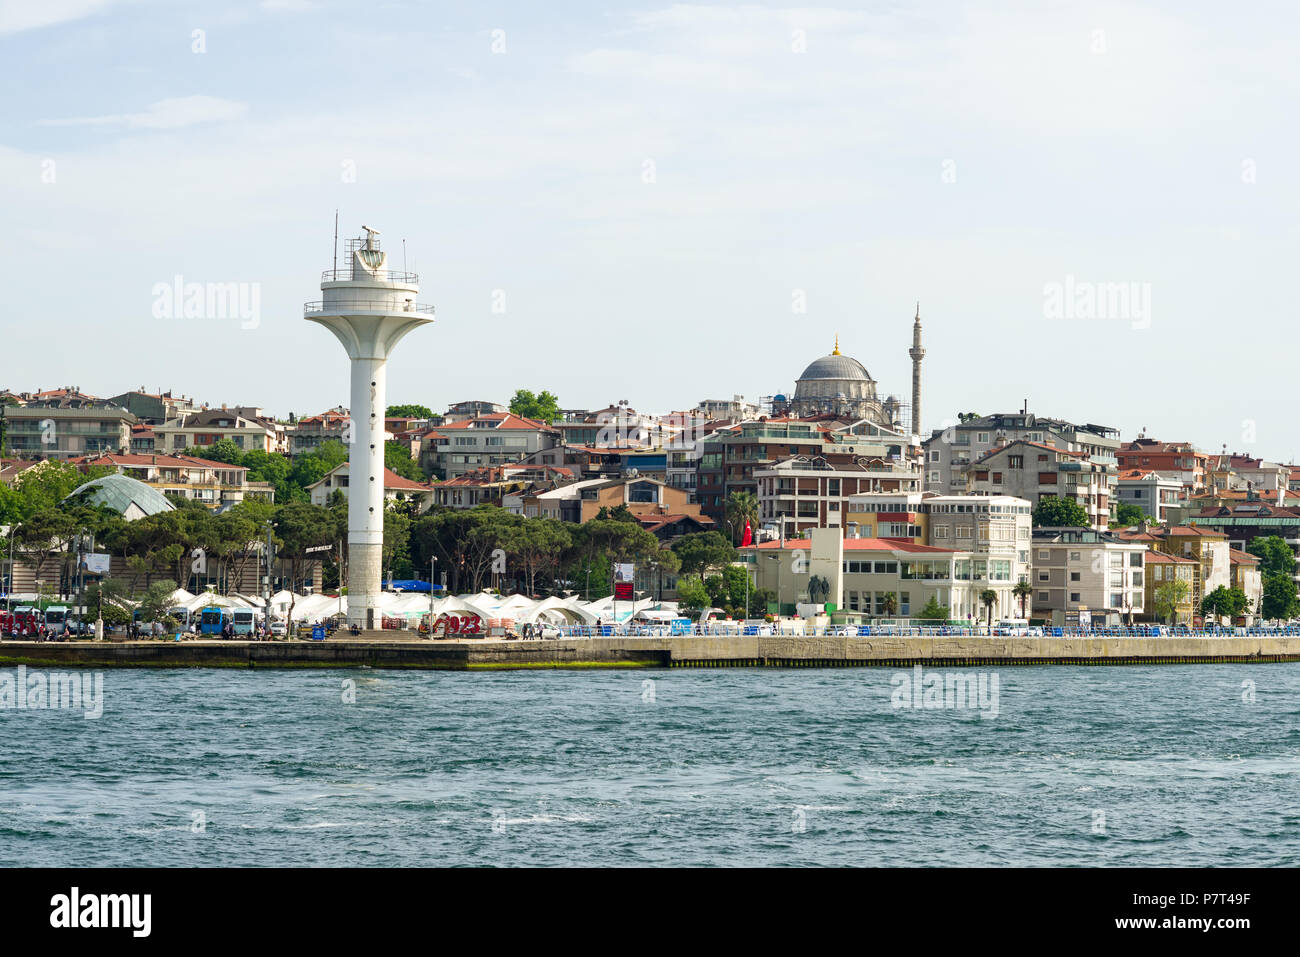 River traffic tower and buildings in the Üsküdar area of Istanbul from the Bosphorus Strait on a sunny day Stock Photo